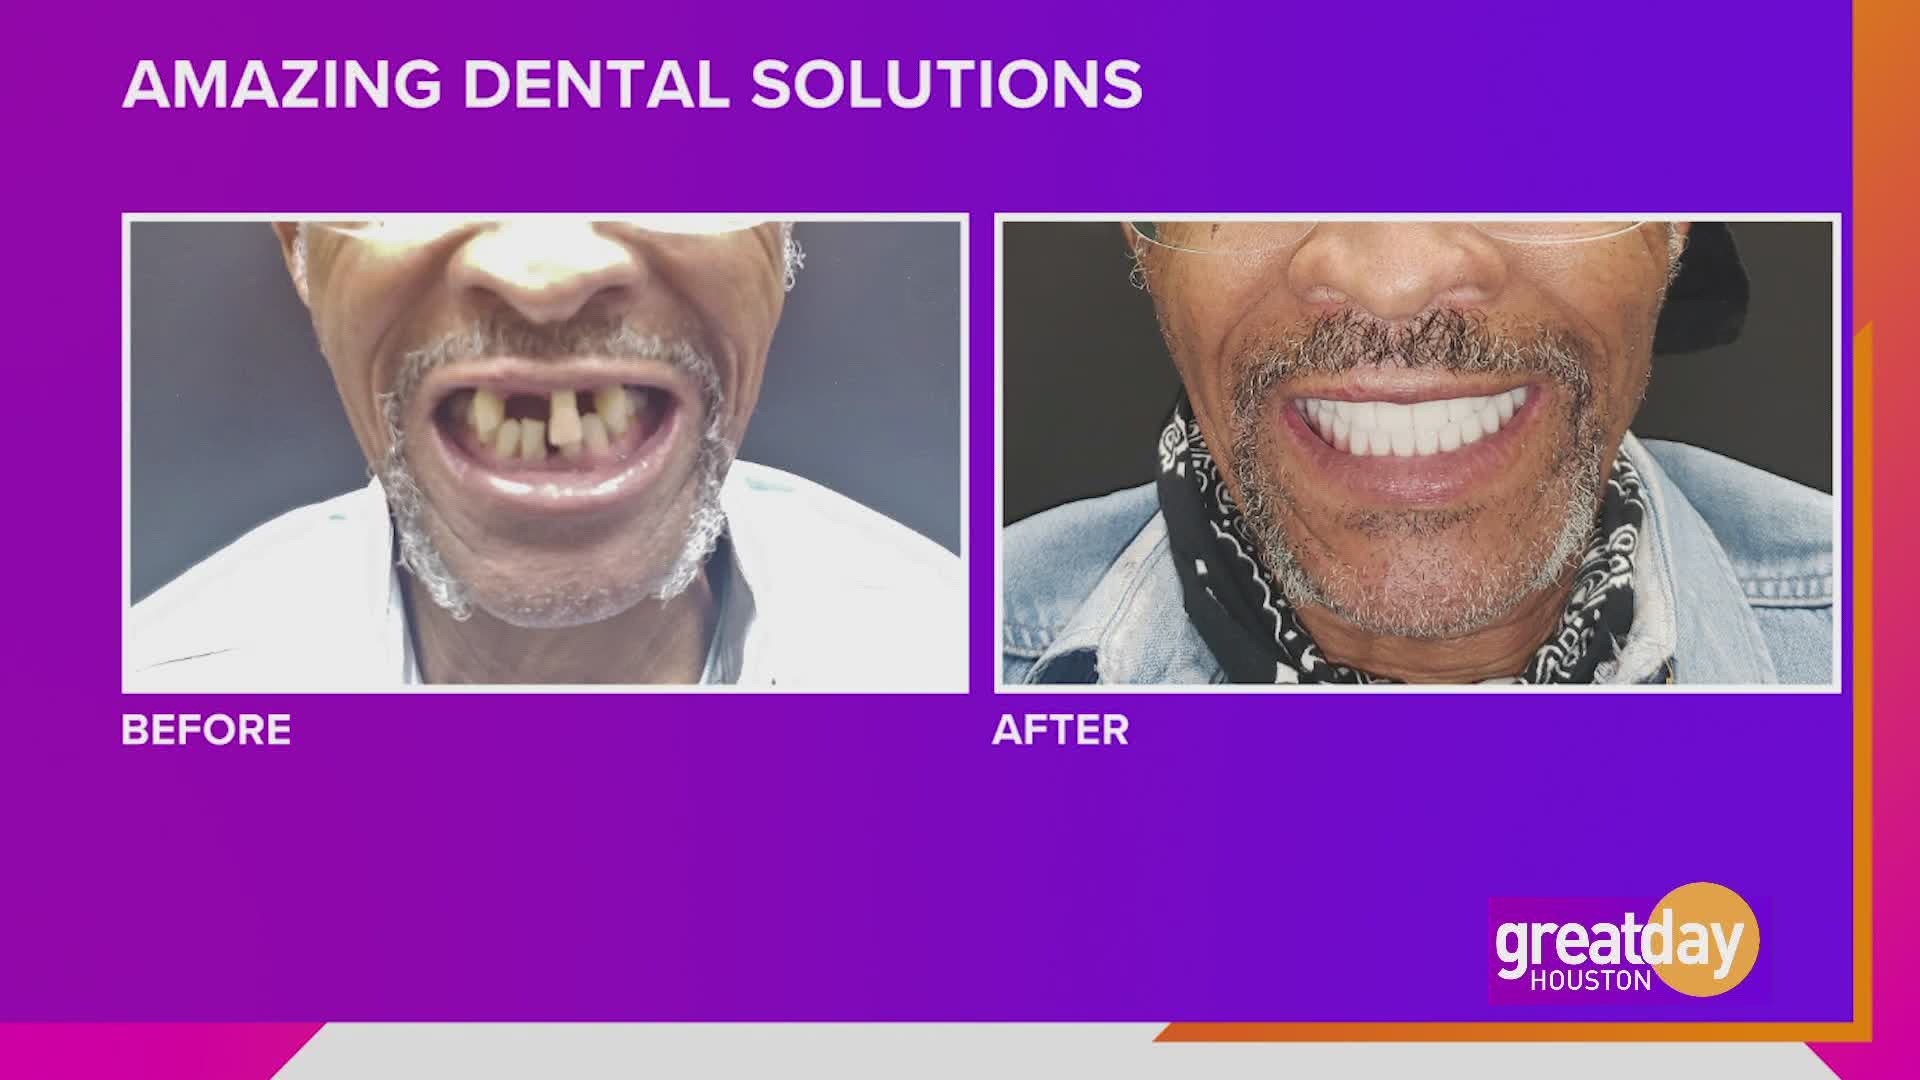 Dr. James Amaning helps restore your smile, self-esteem and life